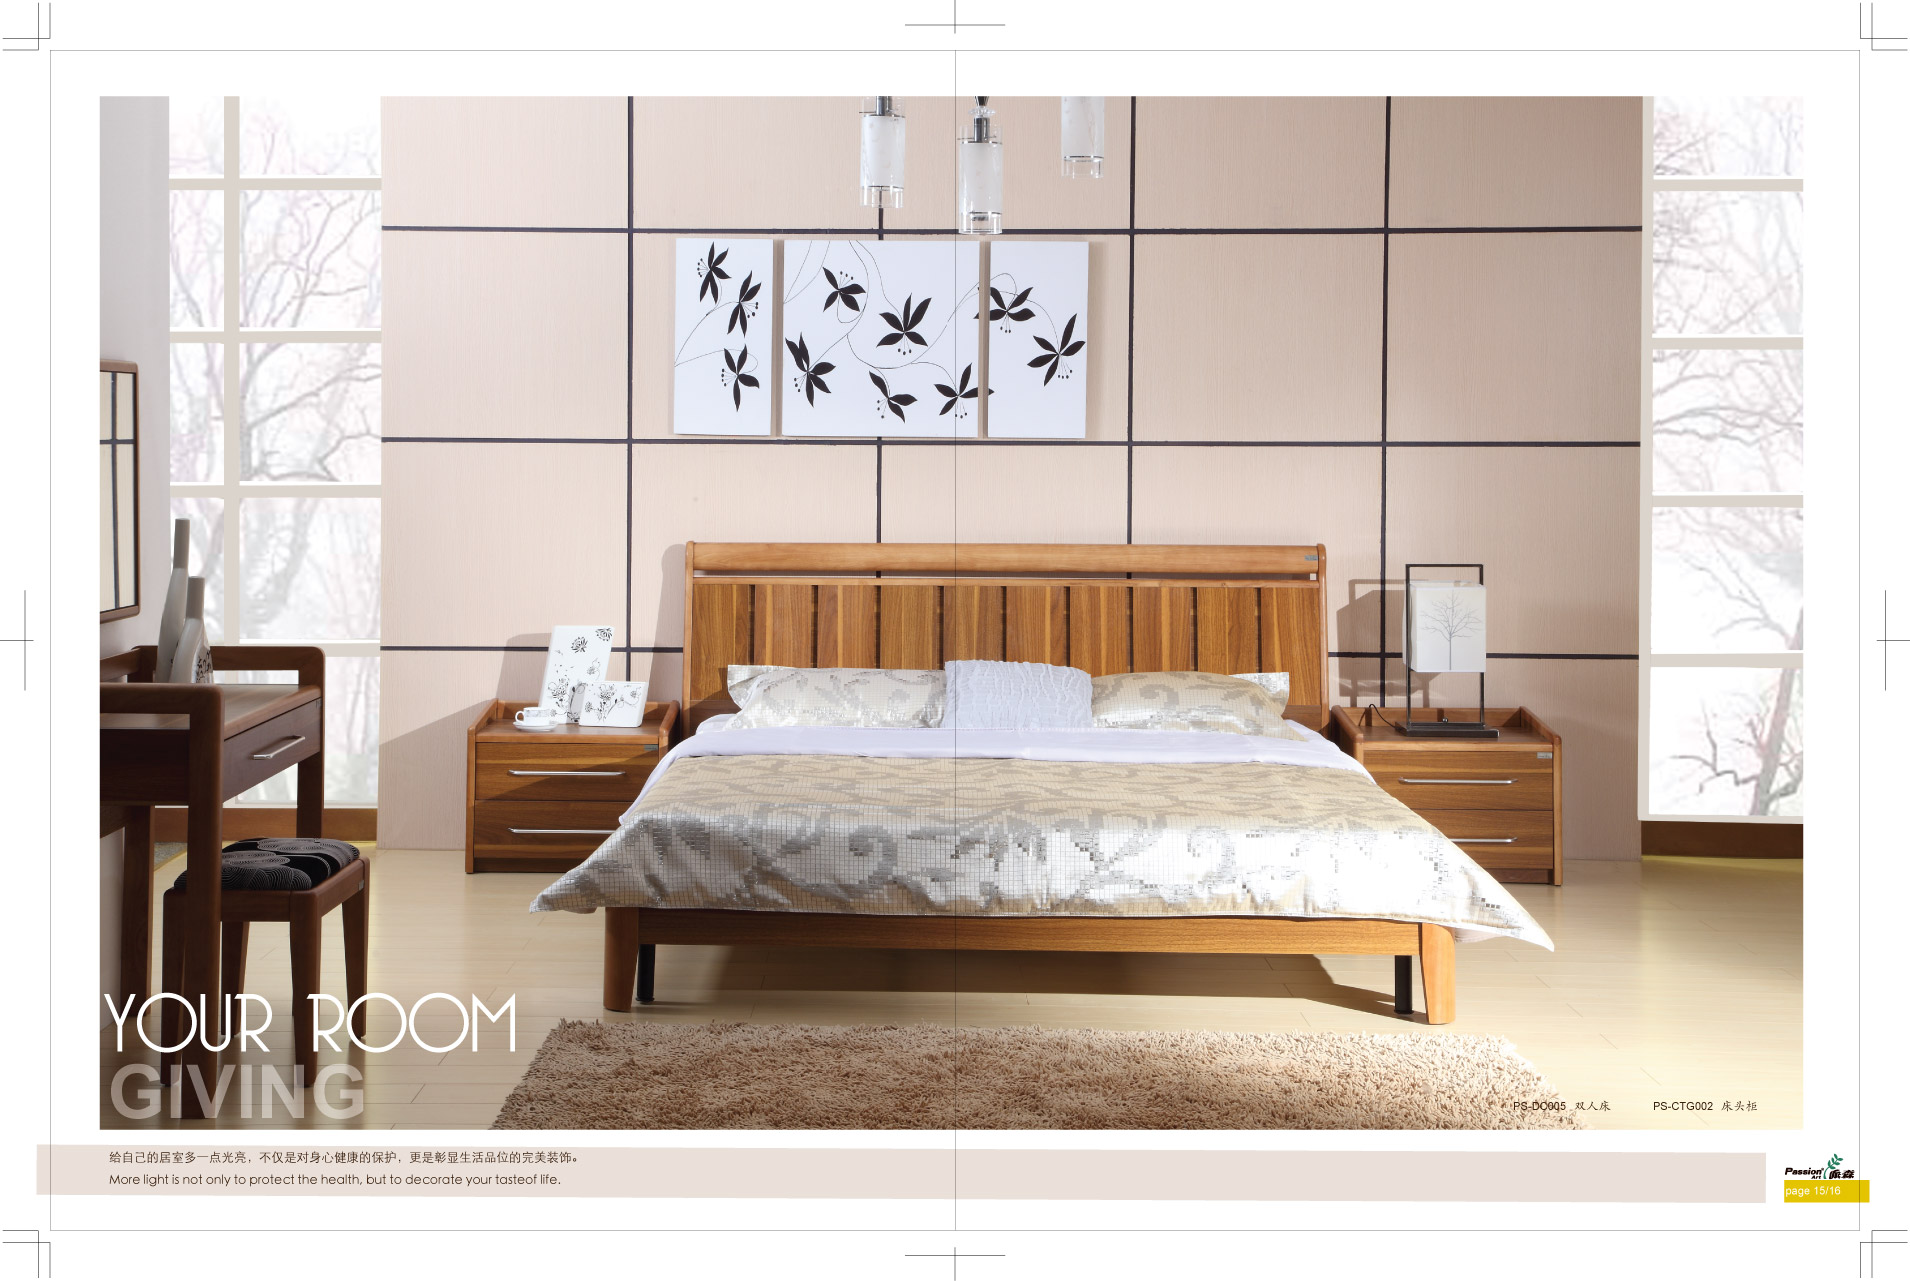 Classic wooden bed high quality